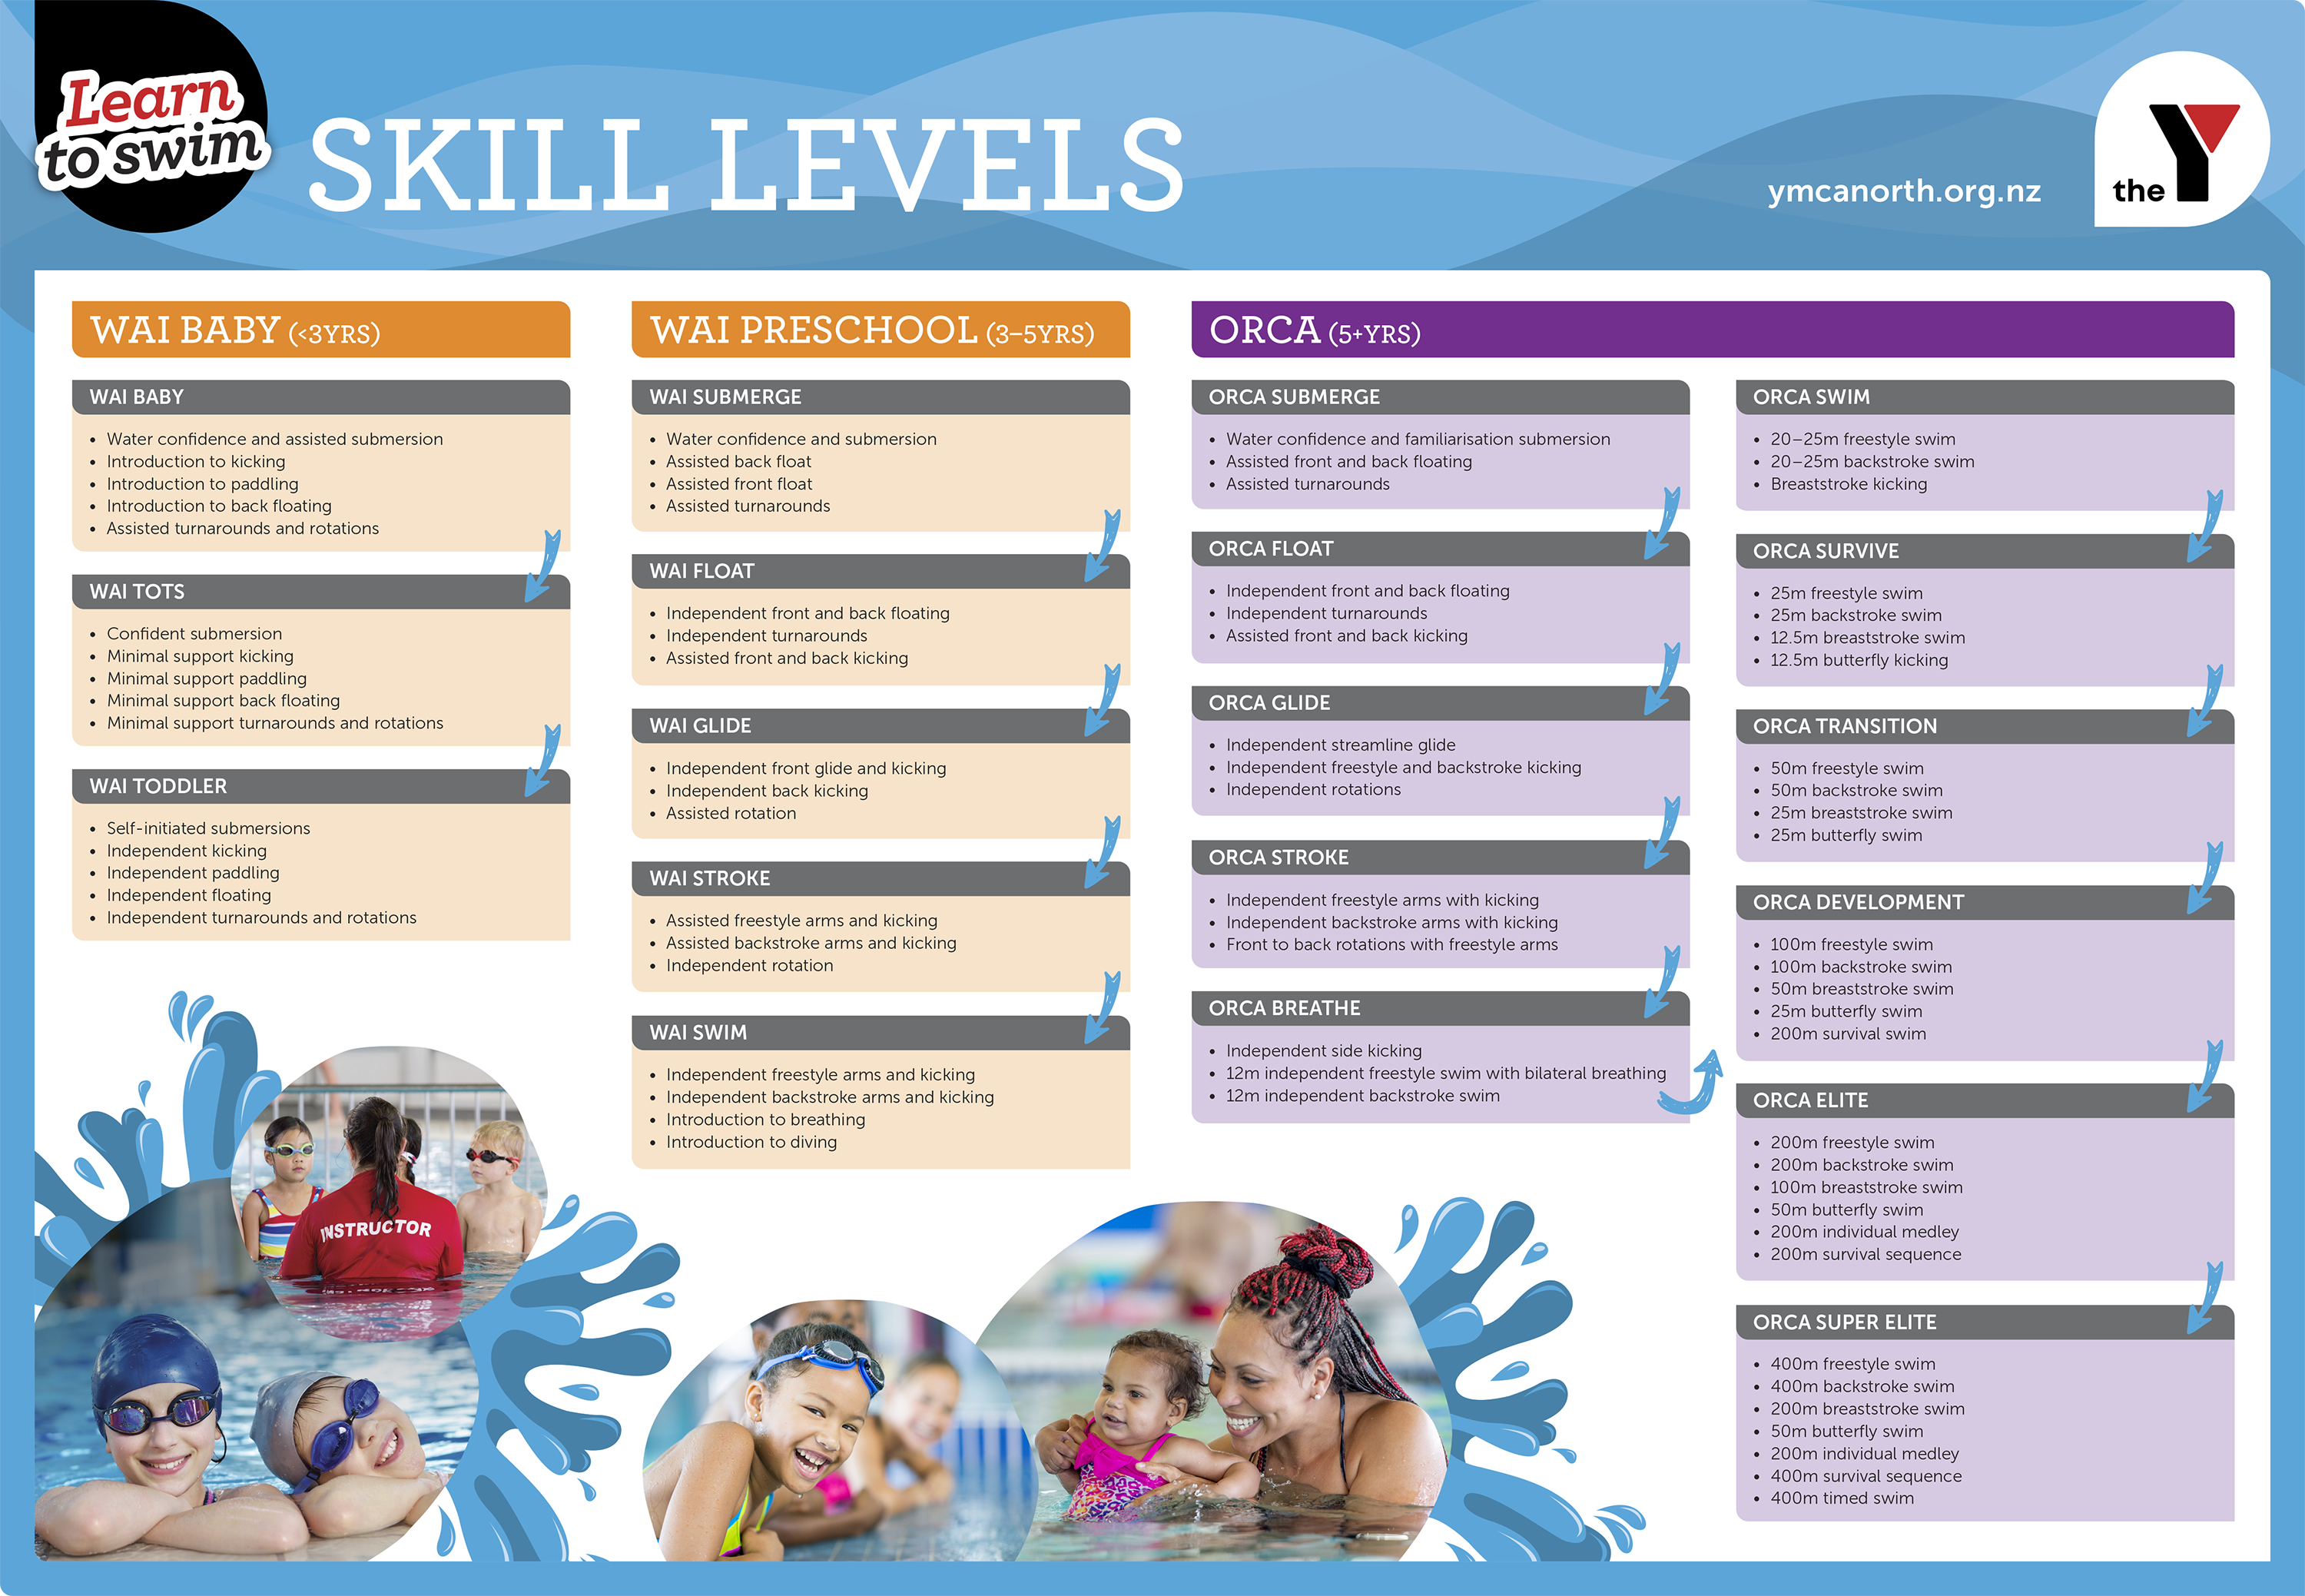 Skill Levels Overview